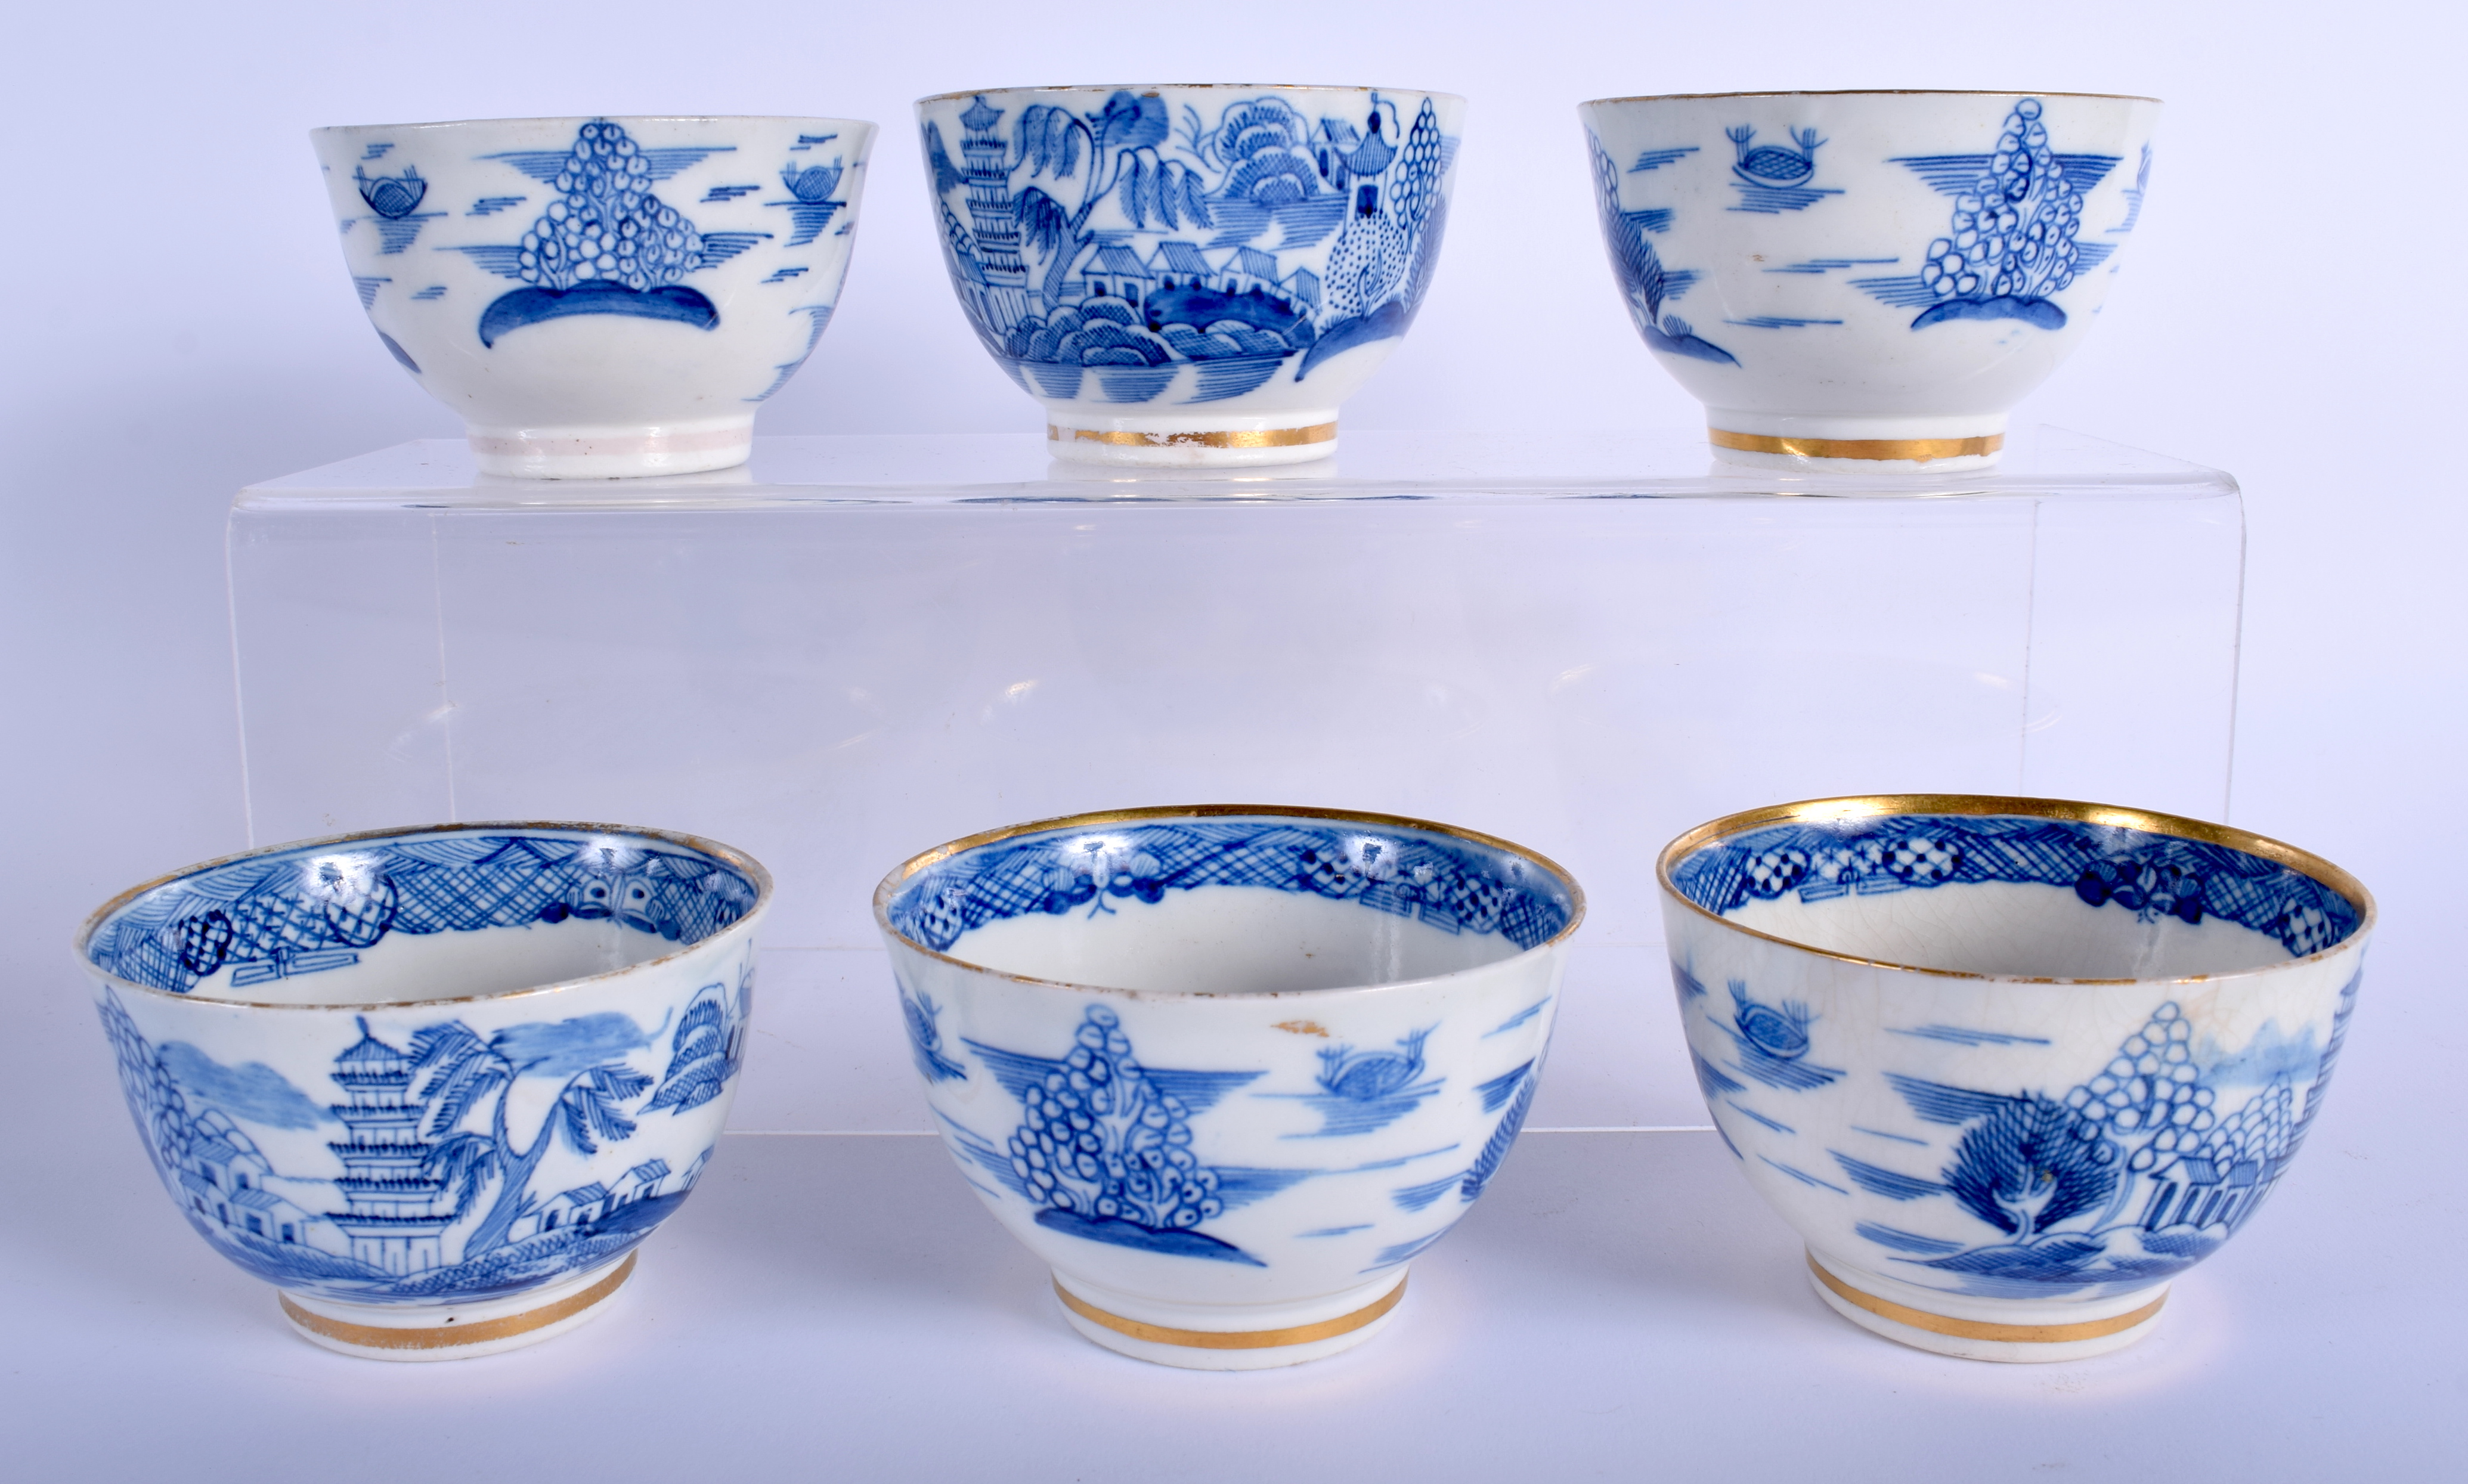 AN EARLY 19TH CENTURY ENGLISH PEARLWARE TEASET painted with landscapes. Largest 24 cm wide. (14) - Bild 5 aus 8